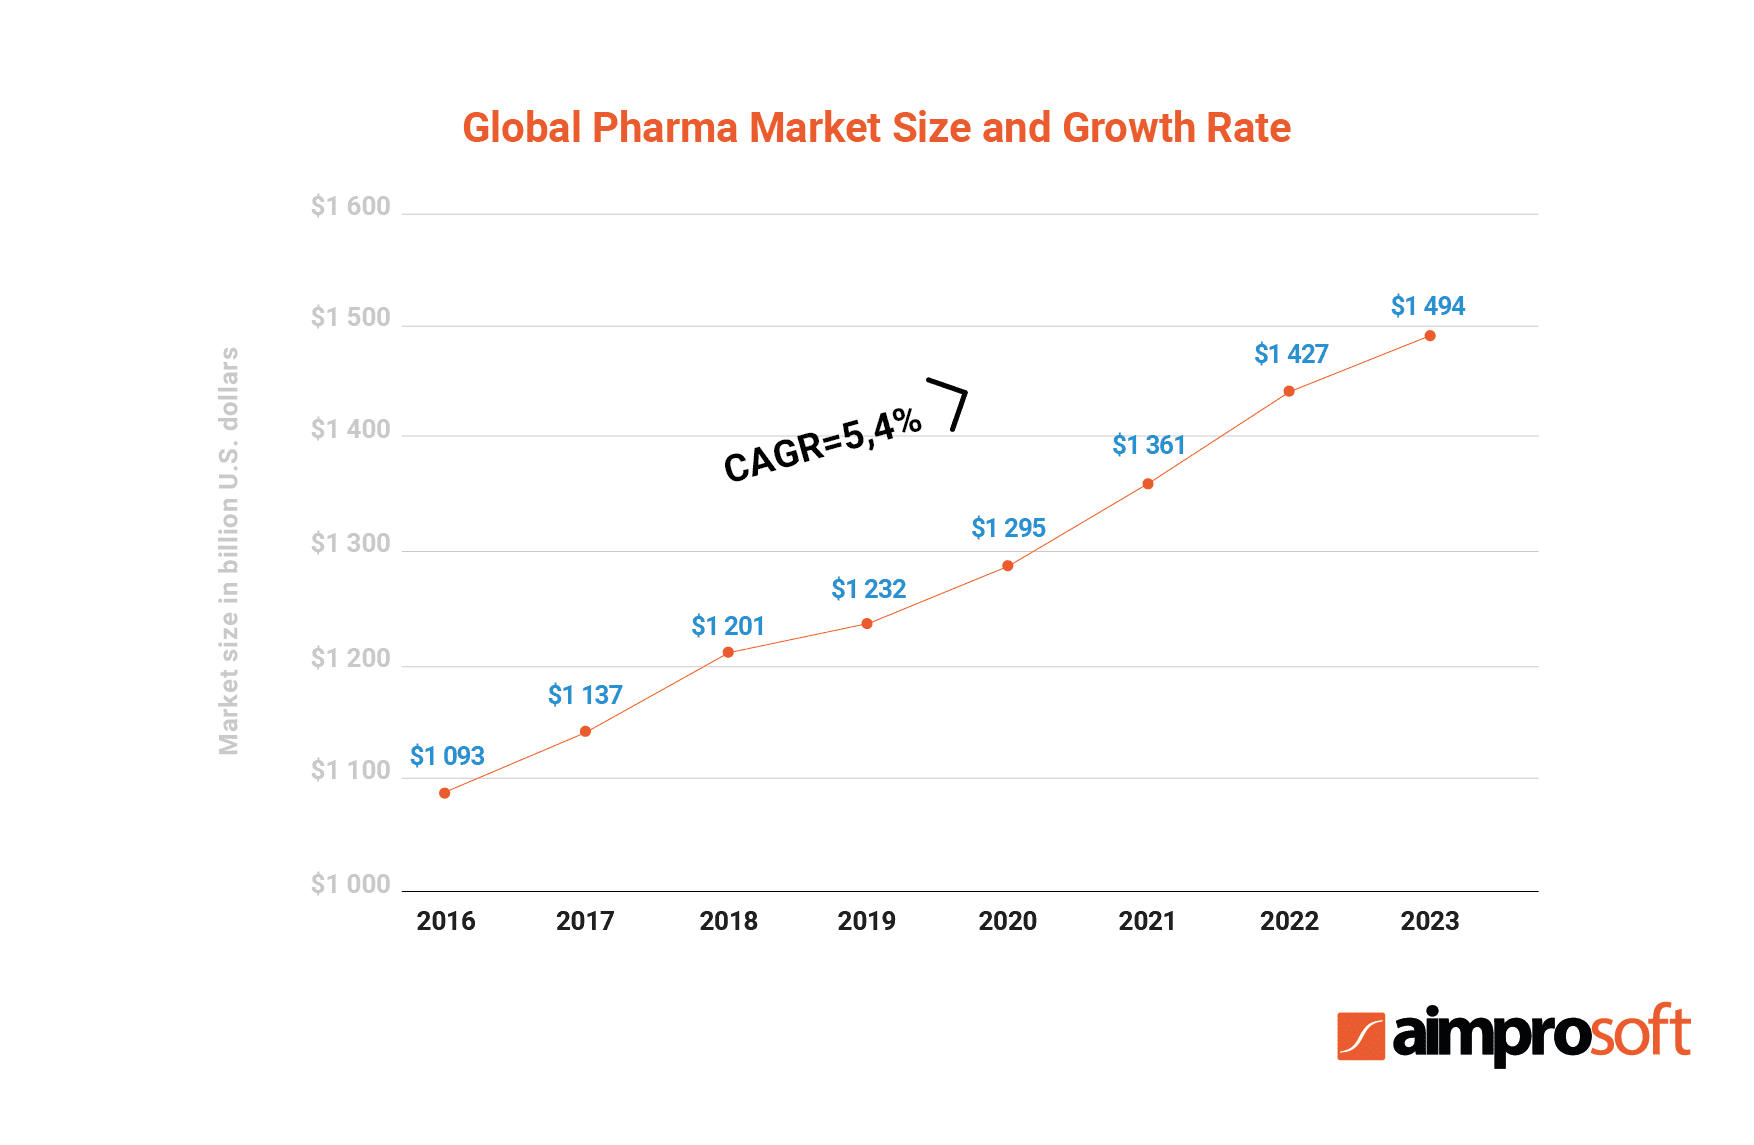 The growth of the pharmaceutical market